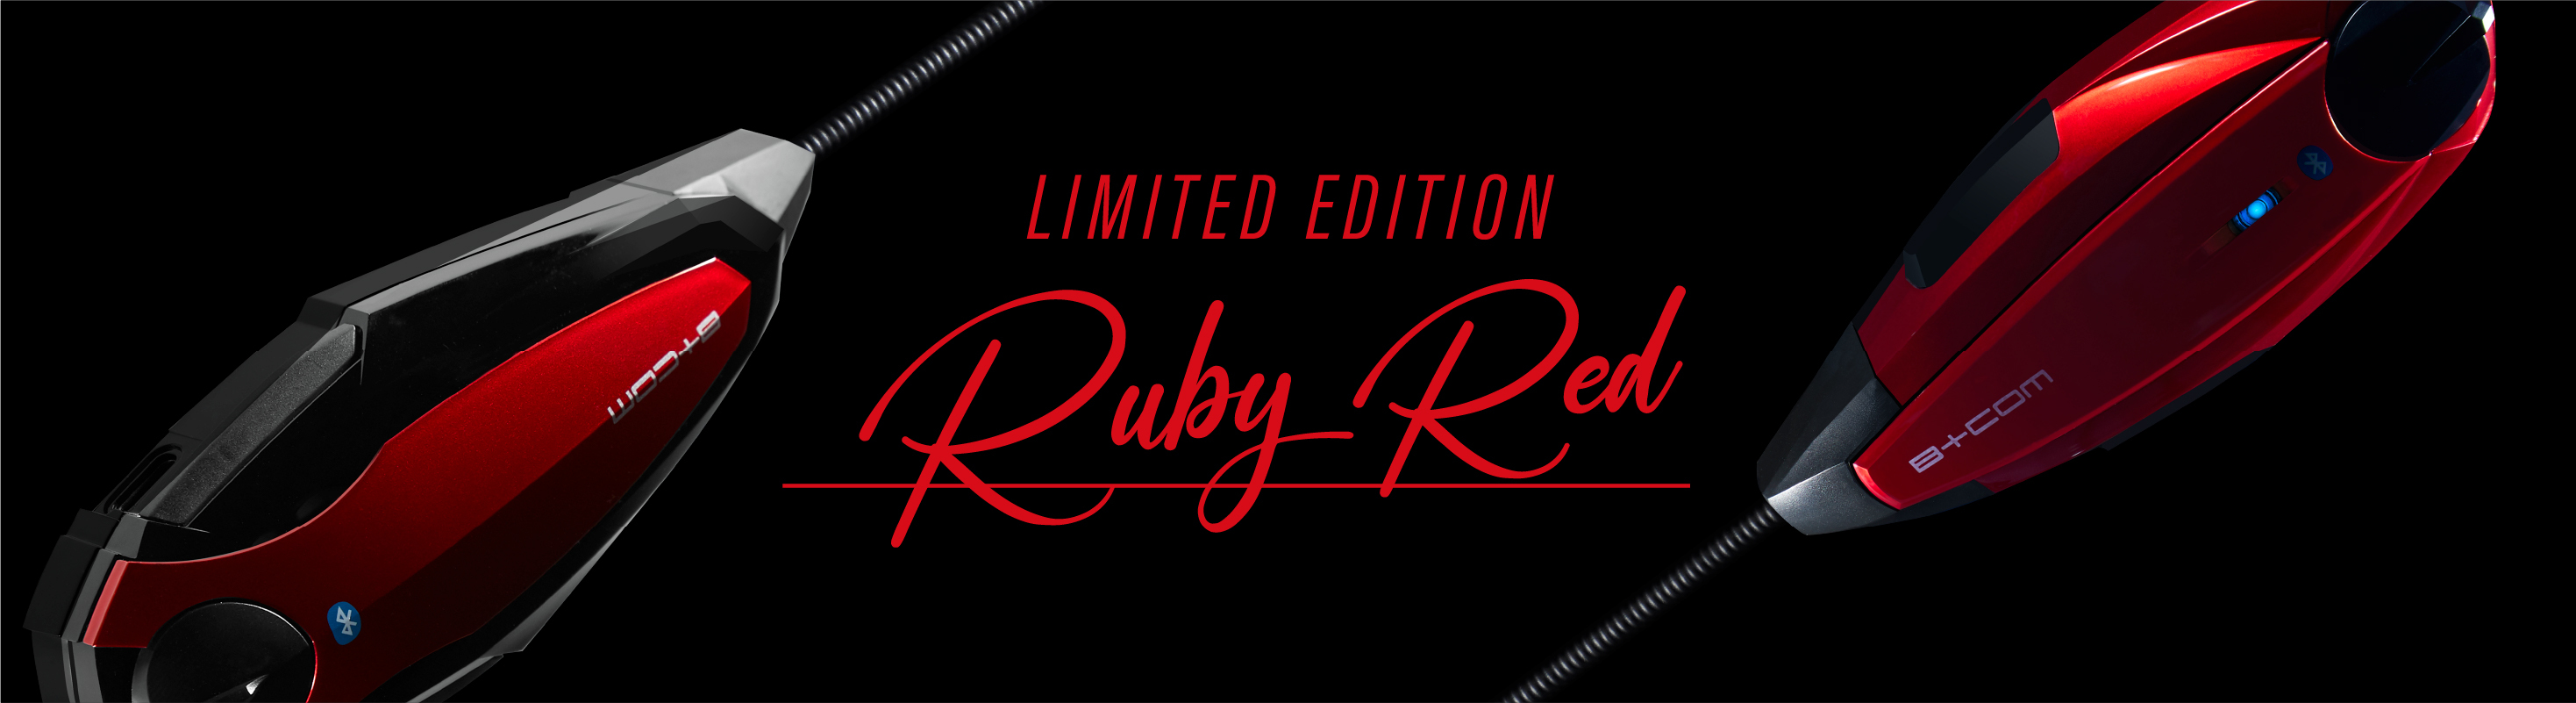 LIMITED EDITION Ruby Red